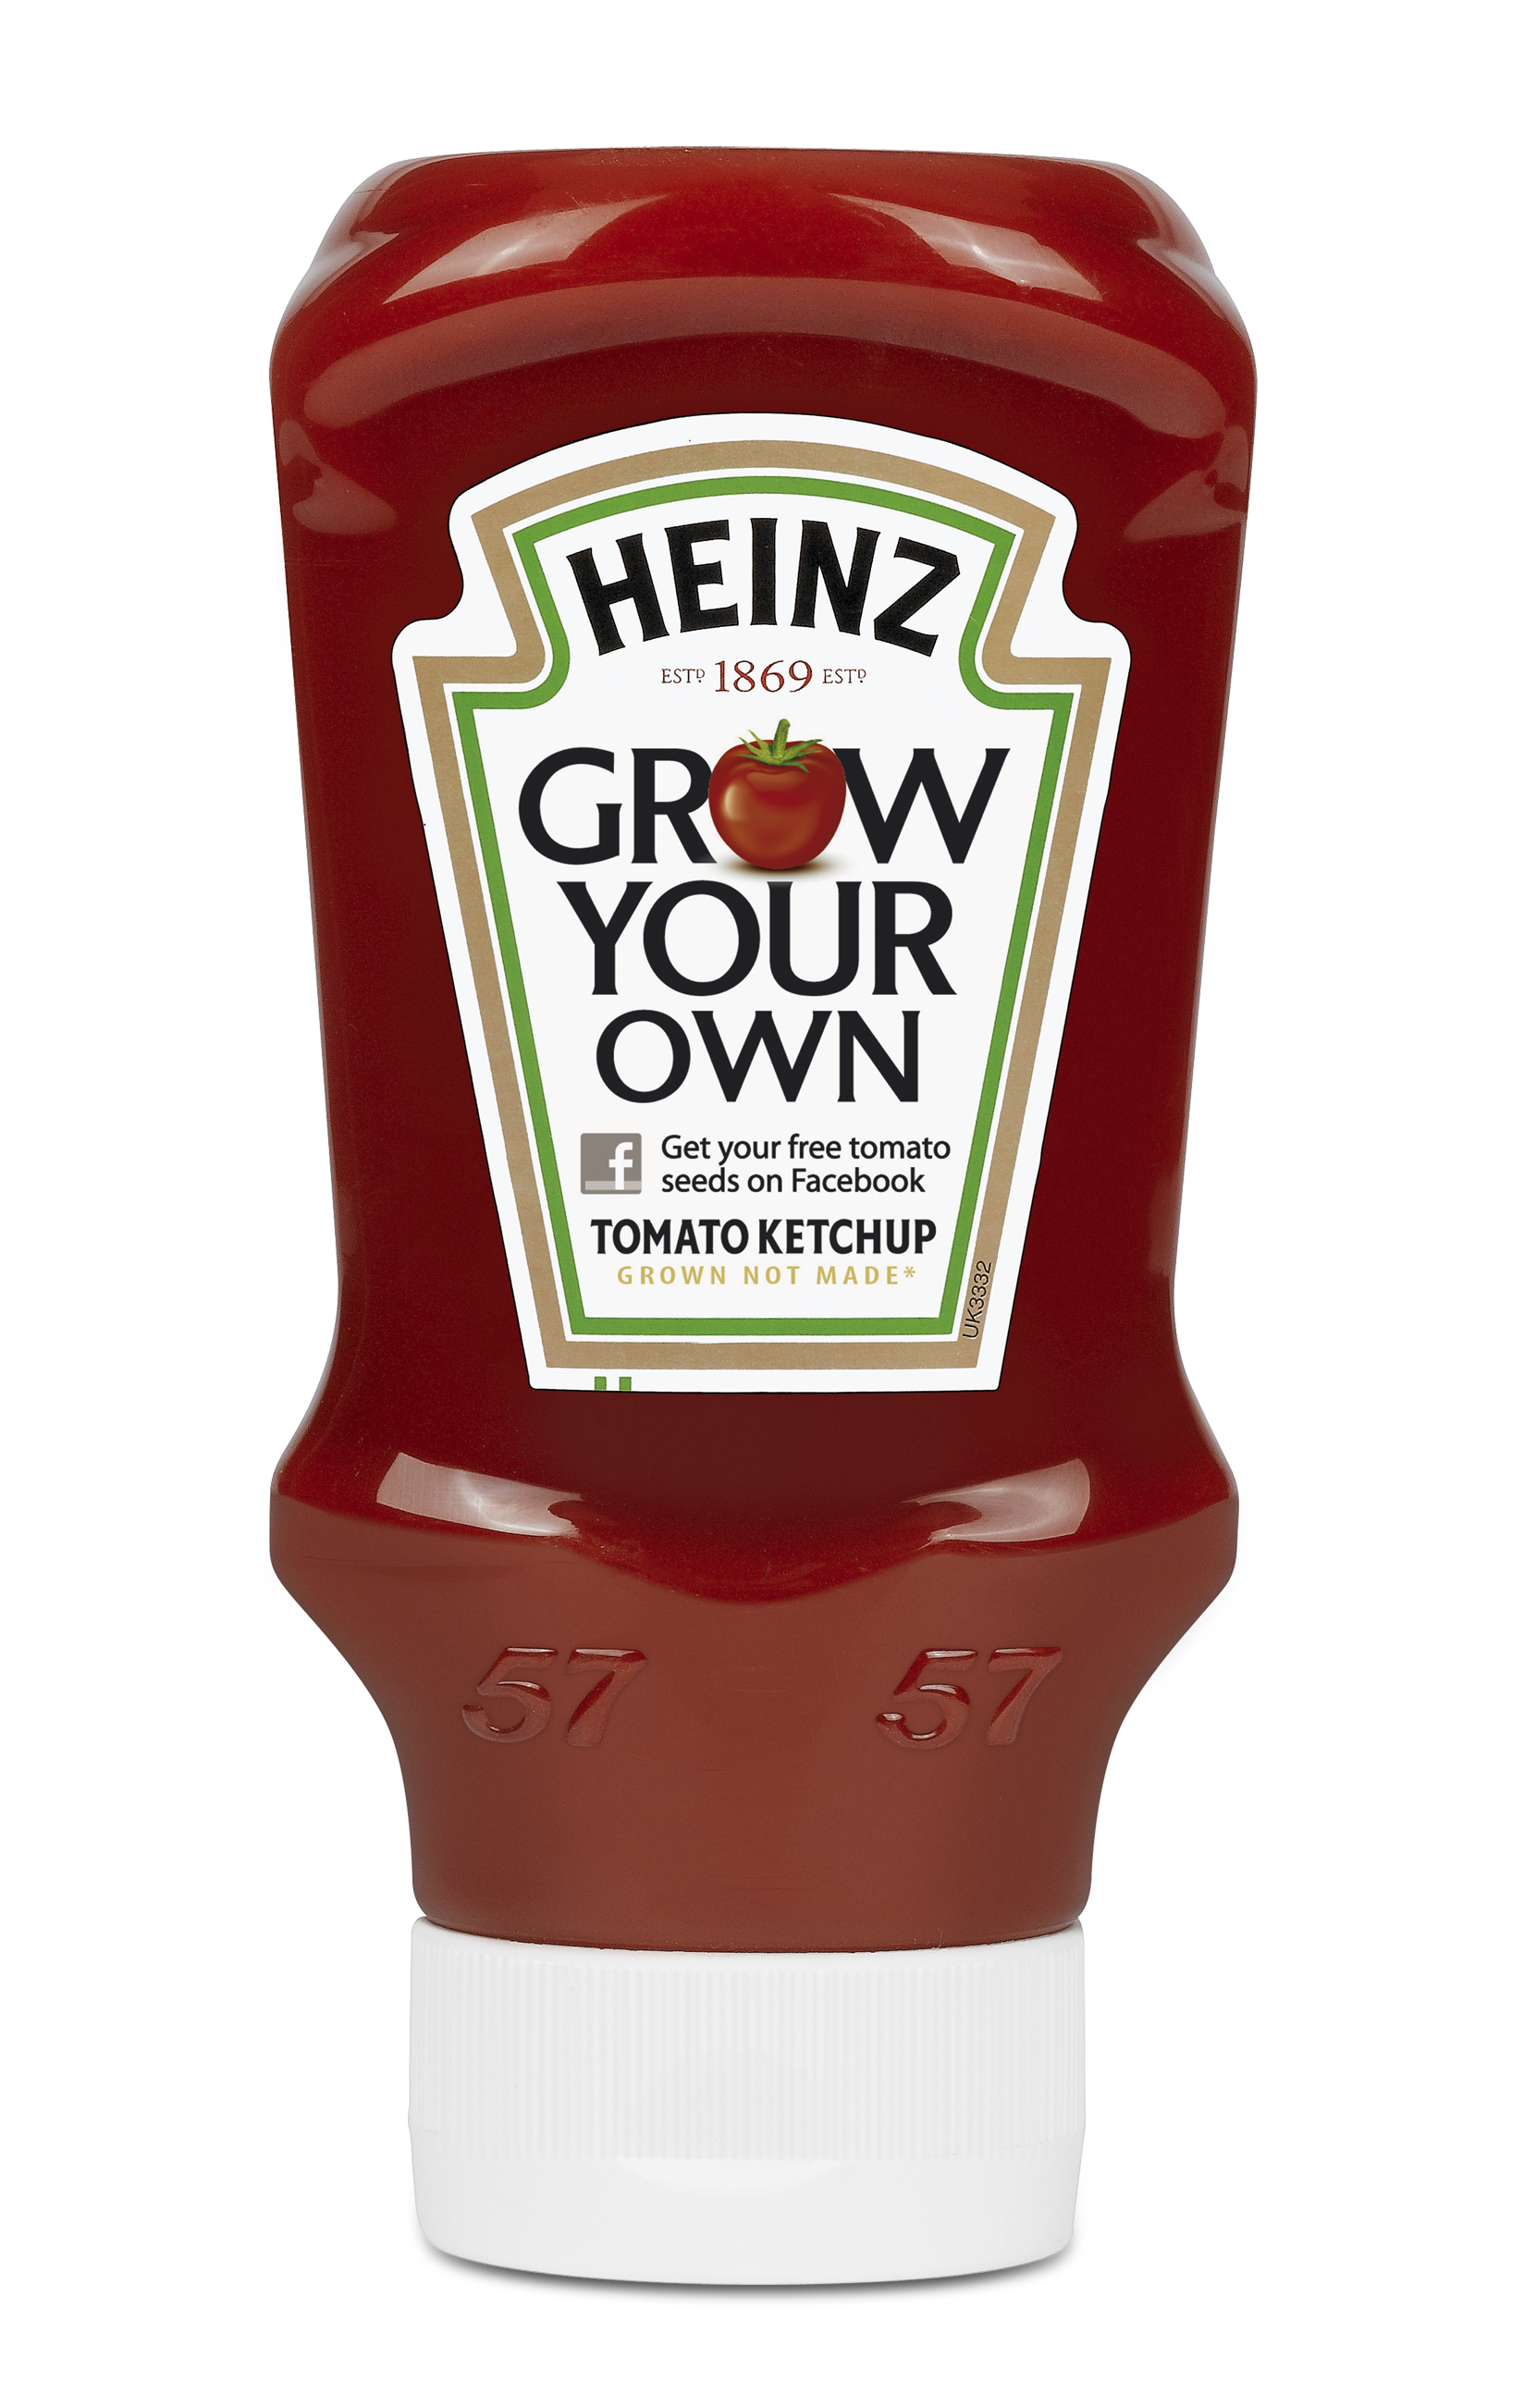 Heinz launches new 'Grow Your Own' campaign